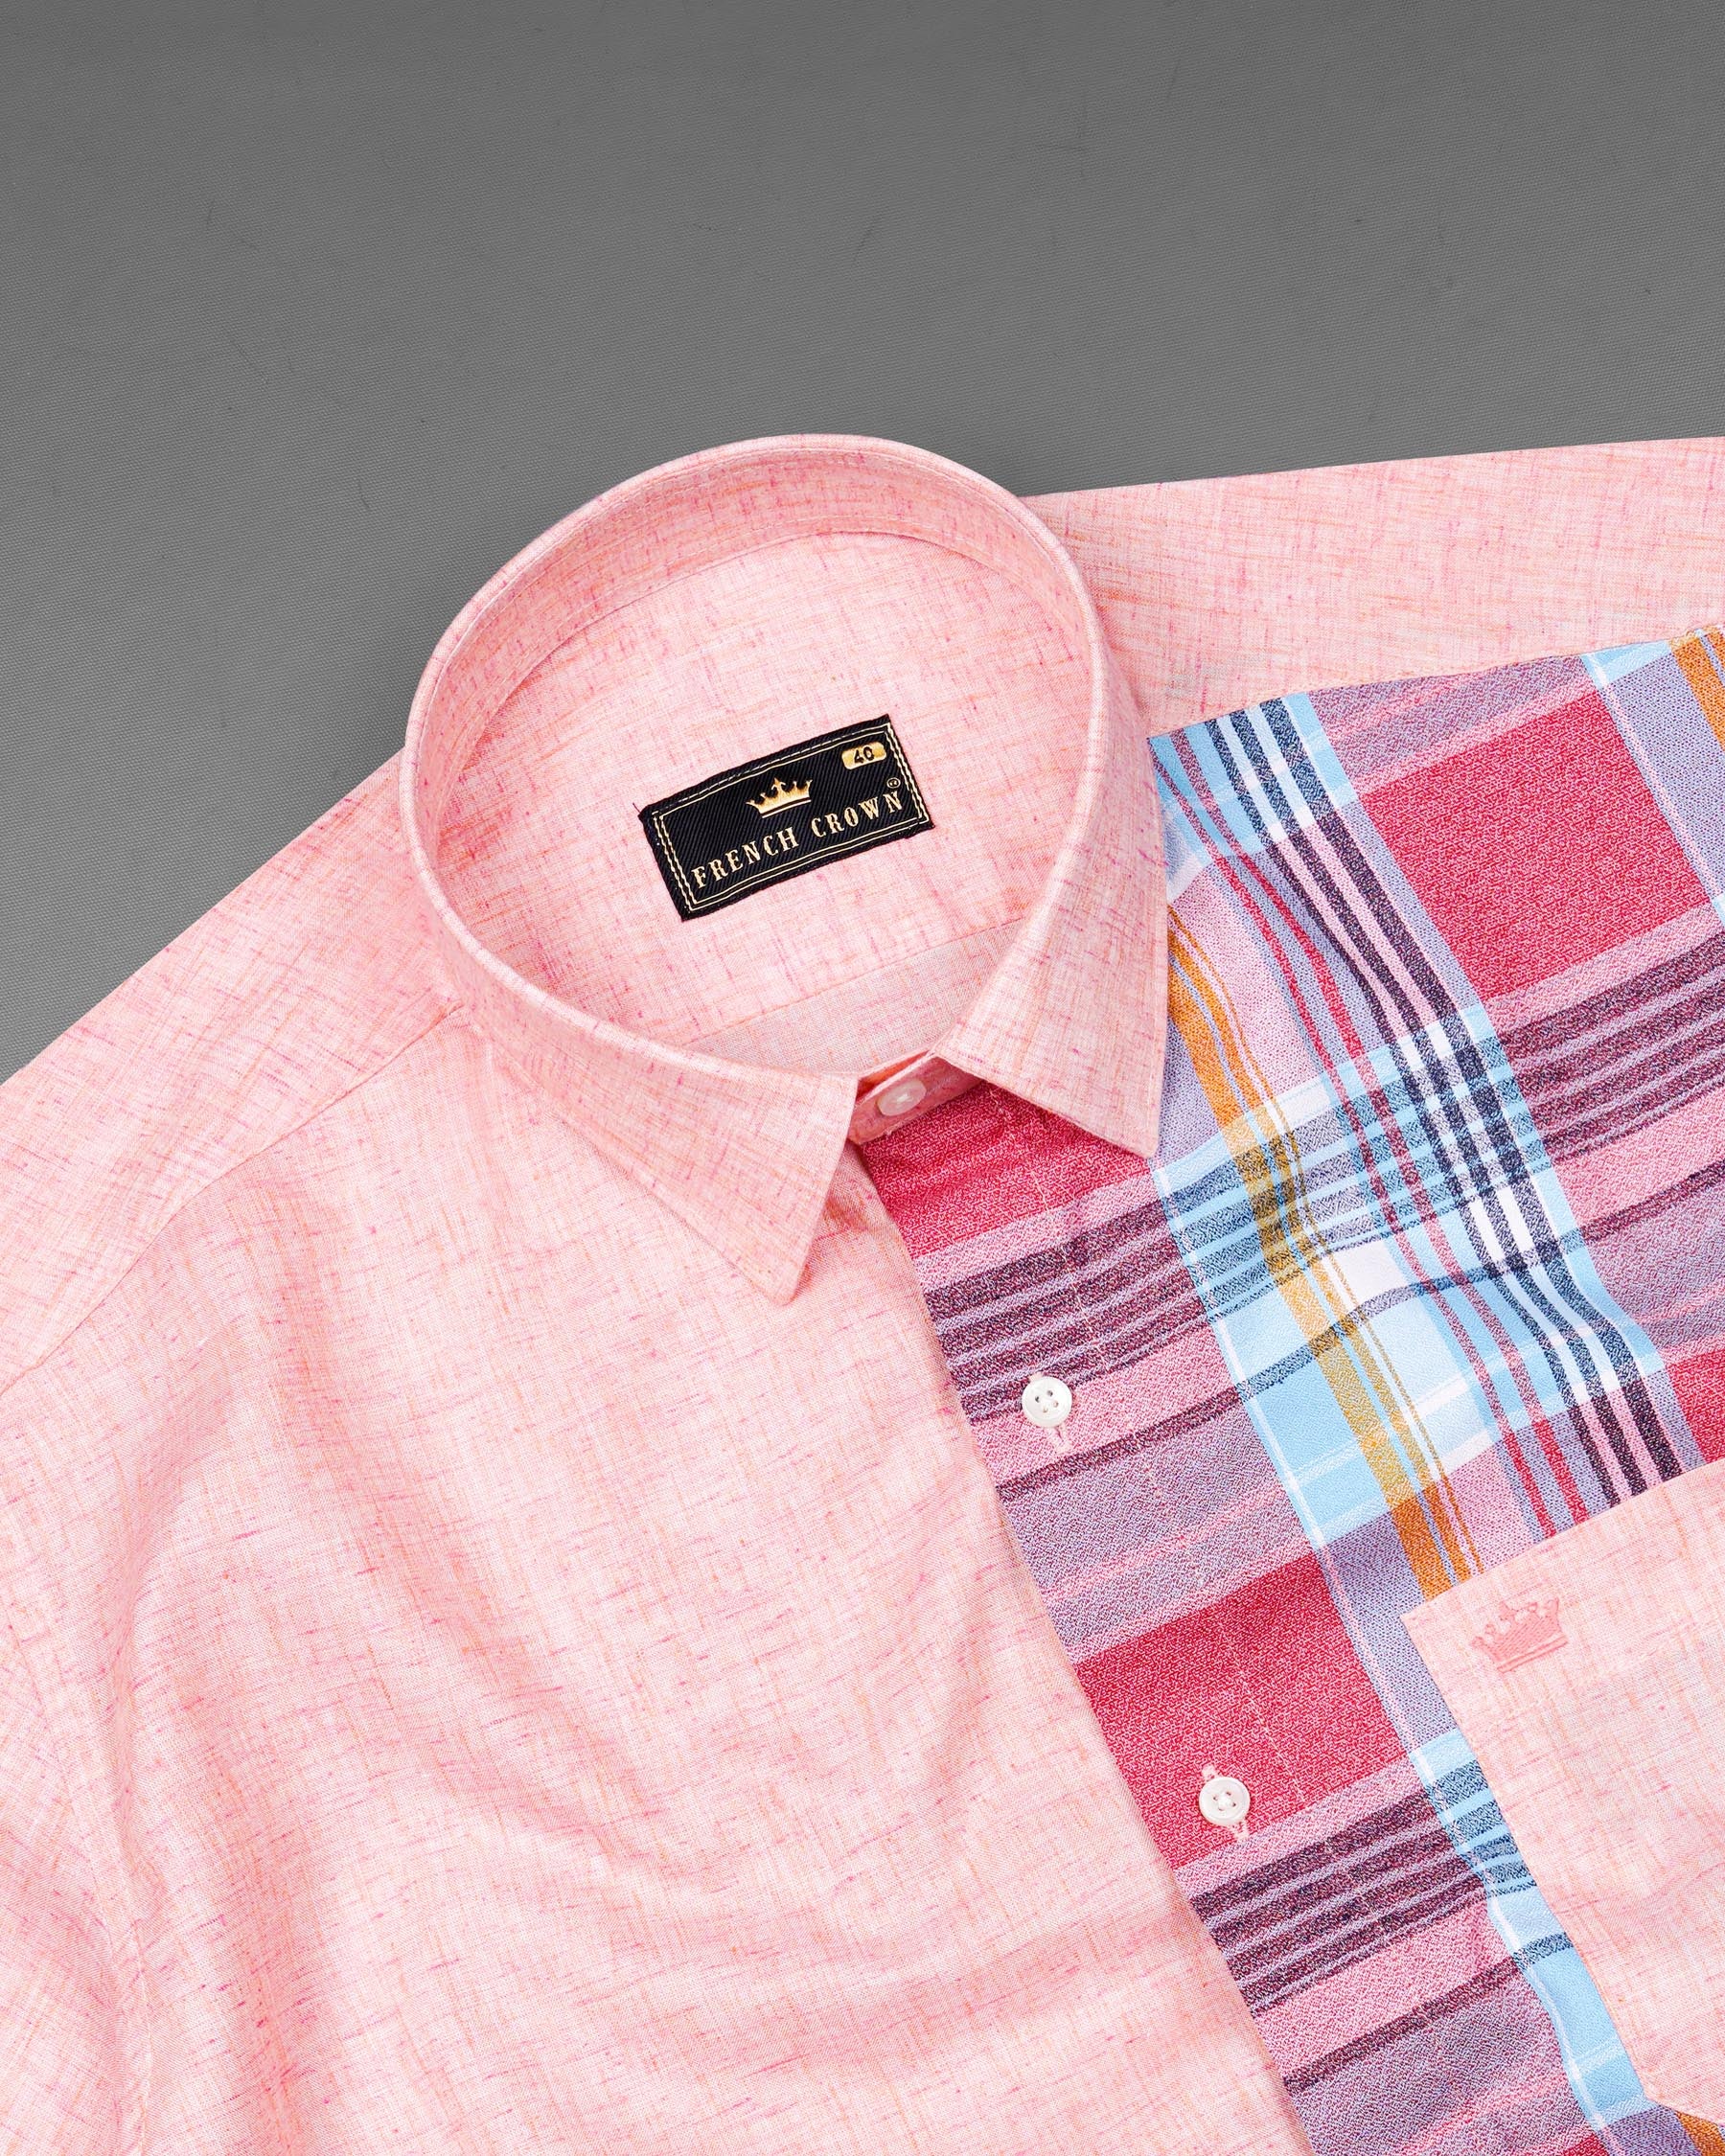 Cosmos Pink and Froly Pink Dobby Textured Premium Giza Cotton Designer Shirt 7717-P189-38,7717-P189-38,7717-P189-39,7717-P189-39,7717-P189-40,7717-P189-40,7717-P189-42,7717-P189-42,7717-P189-44,7717-P189-44,7717-P189-46,7717-P189-46,7717-P189-48,7717-P189-48,7717-P189-50,7717-P189-50,7717-P189-52,7717-P189-52